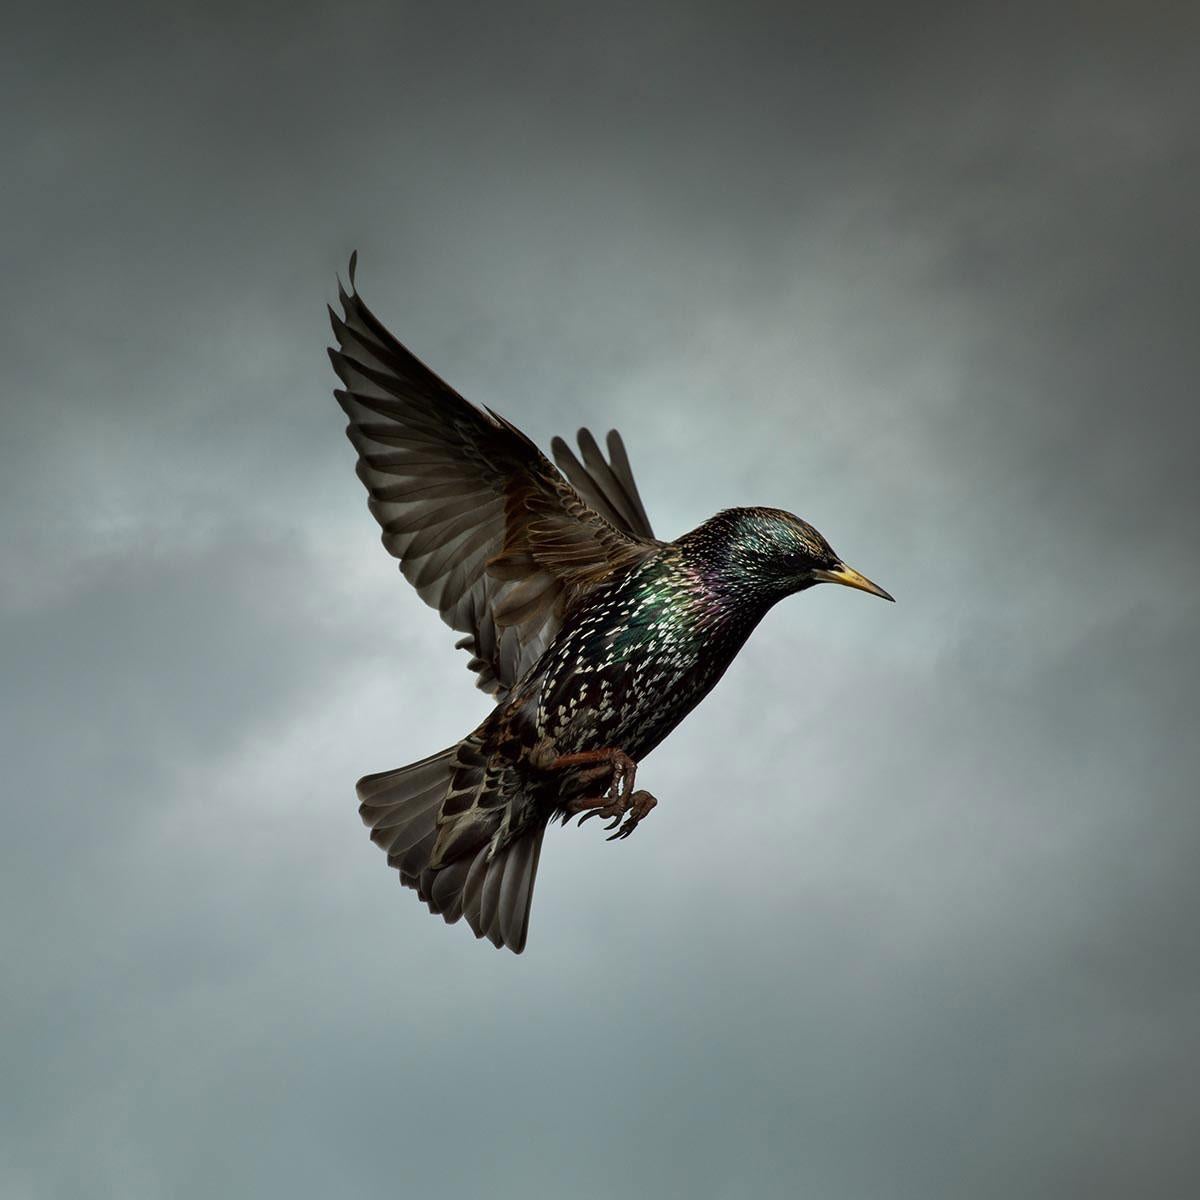 Starling by Mark Harvey 40" x 40" C-type Photographic Print Only